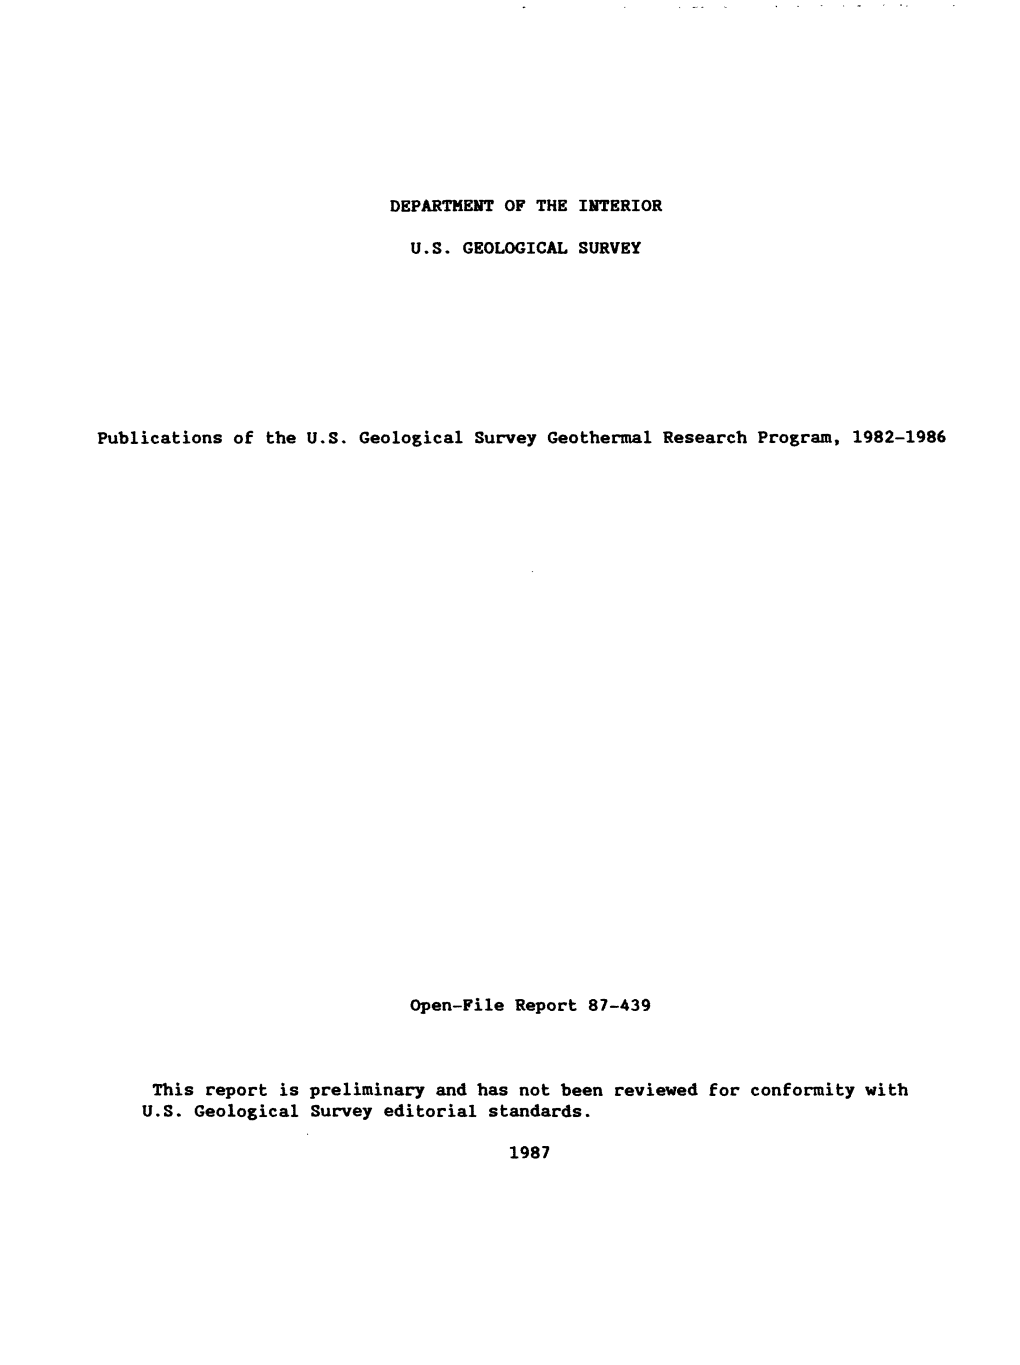 Publications of the U.S. Geological Survey Geothermal Research Program, 1982-1986